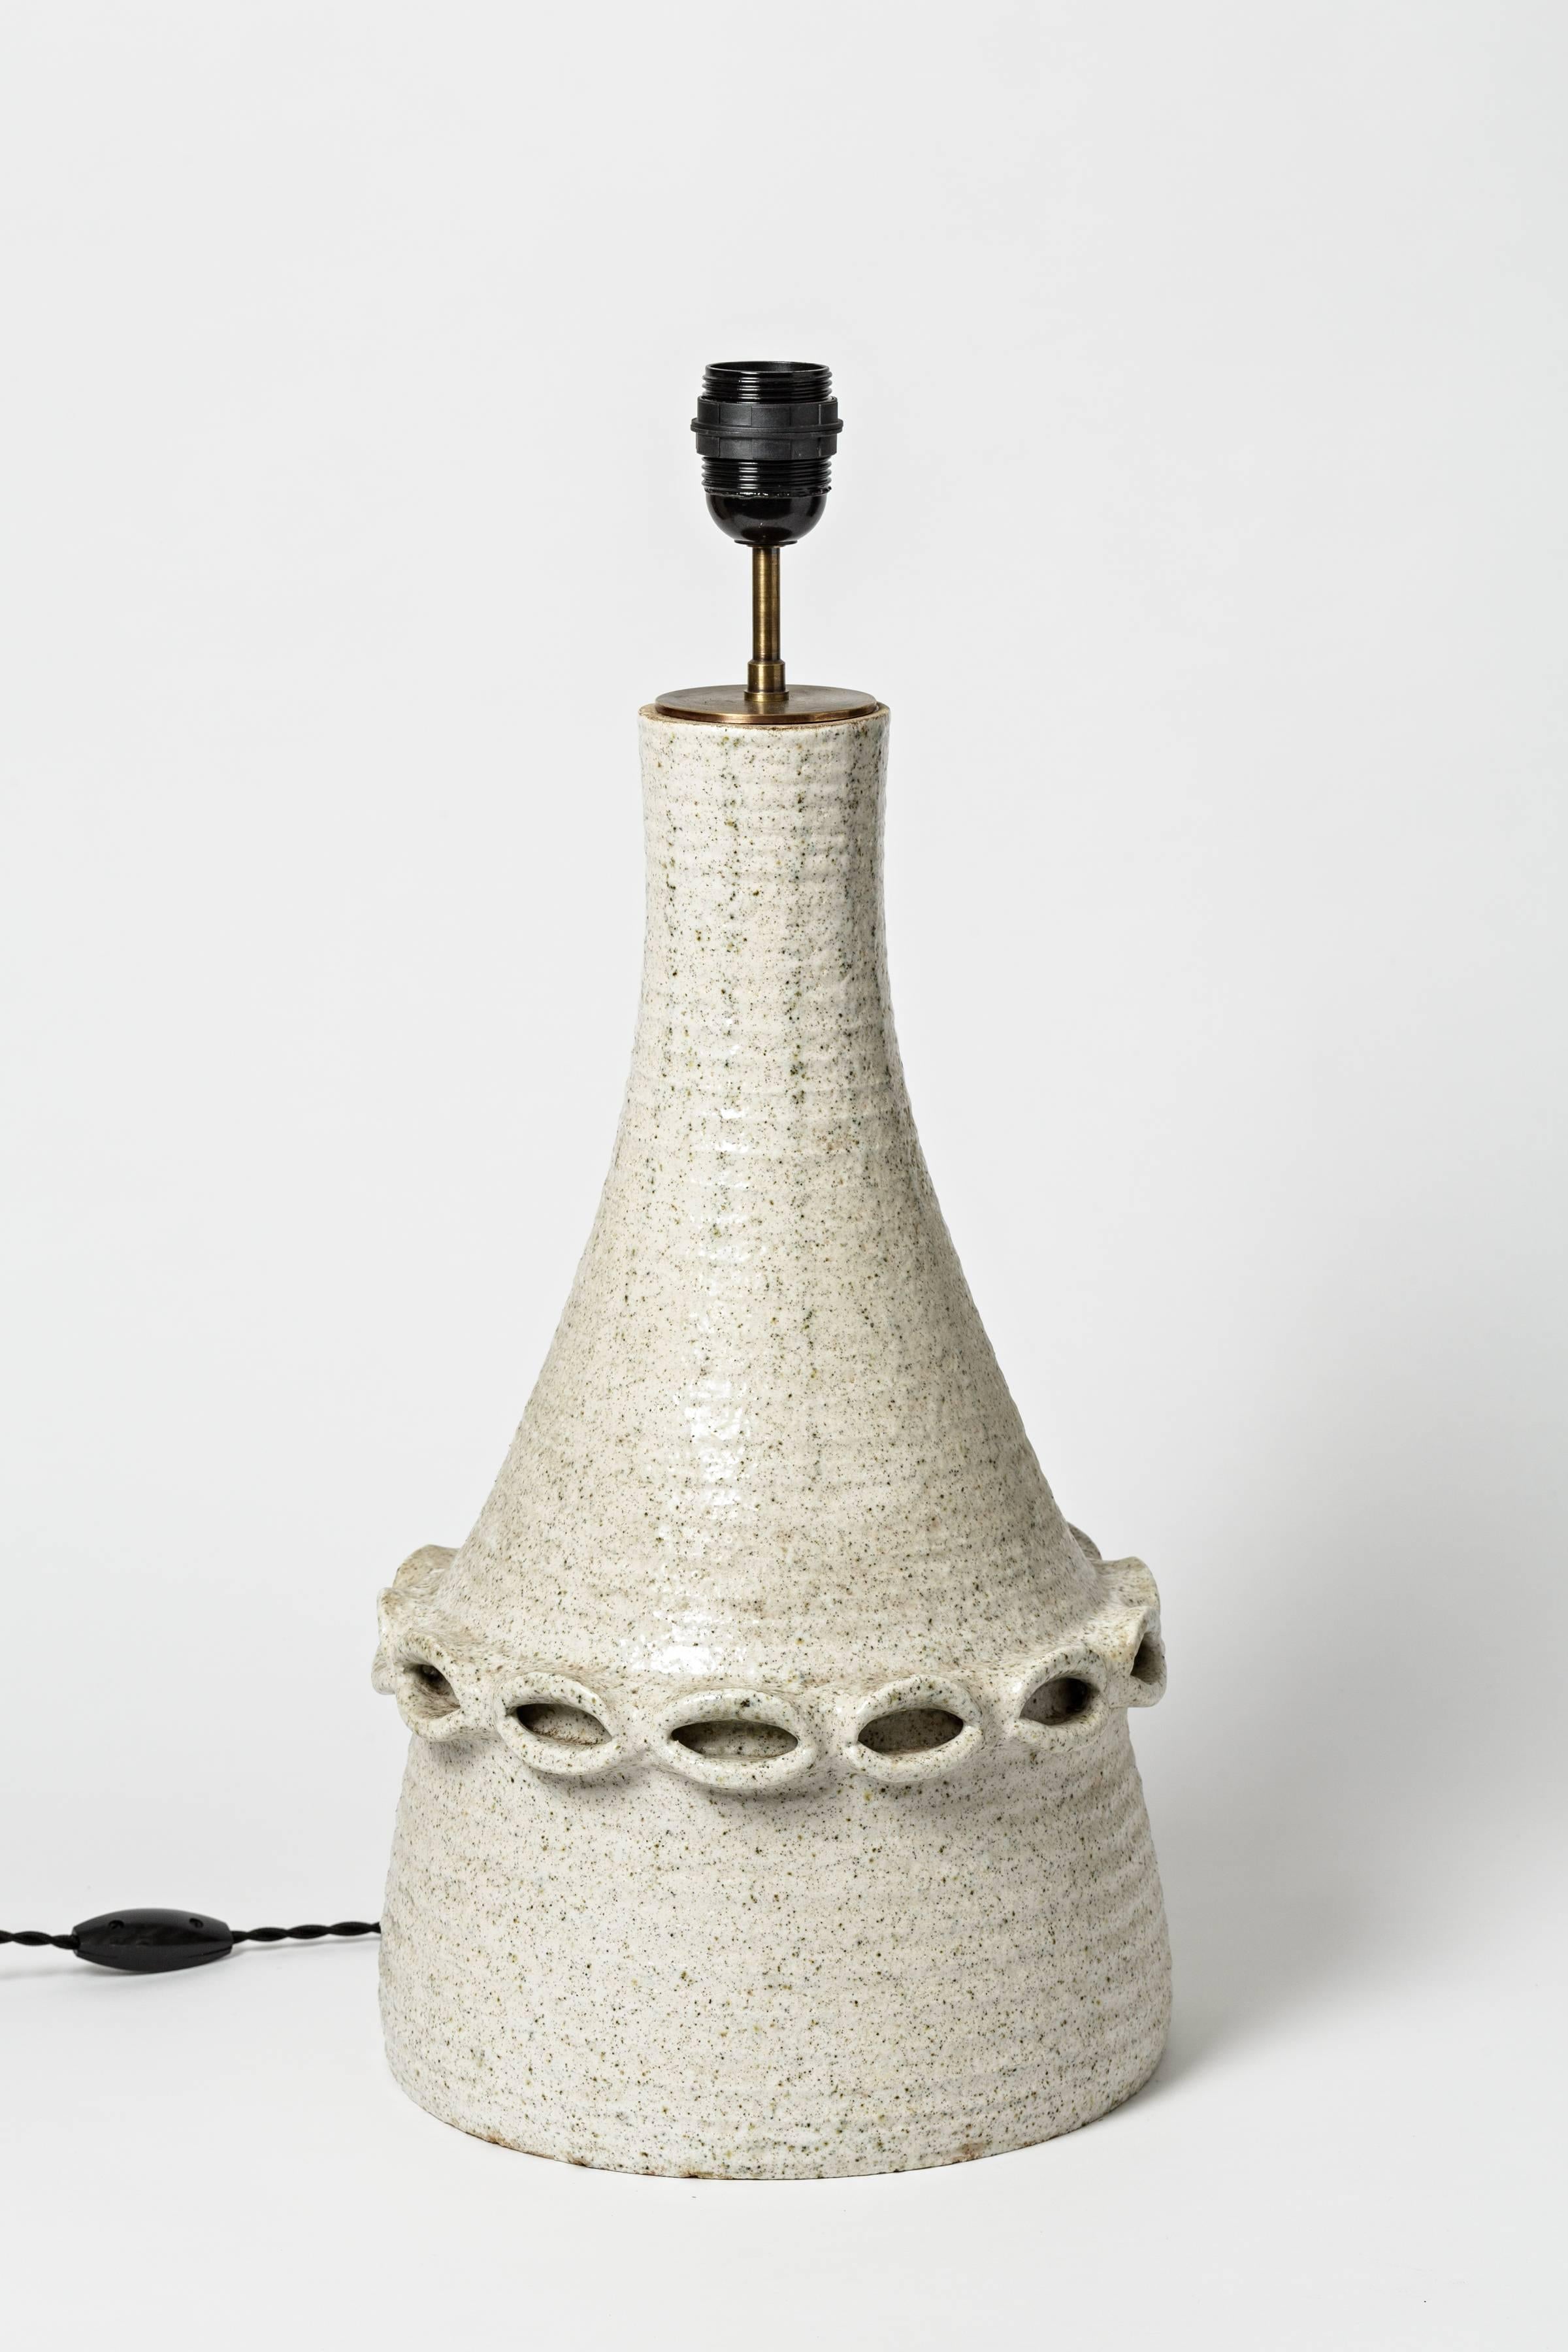 A ceramic lamp by Accolay with geometrical decoration and white glaze.
Perfect original conditions,
circa 1970.

Sold with a new electrical system.

Dimensions with electrical system: 22' x 9' 1/2 x 9' 1/2 inch.

Dimensions without